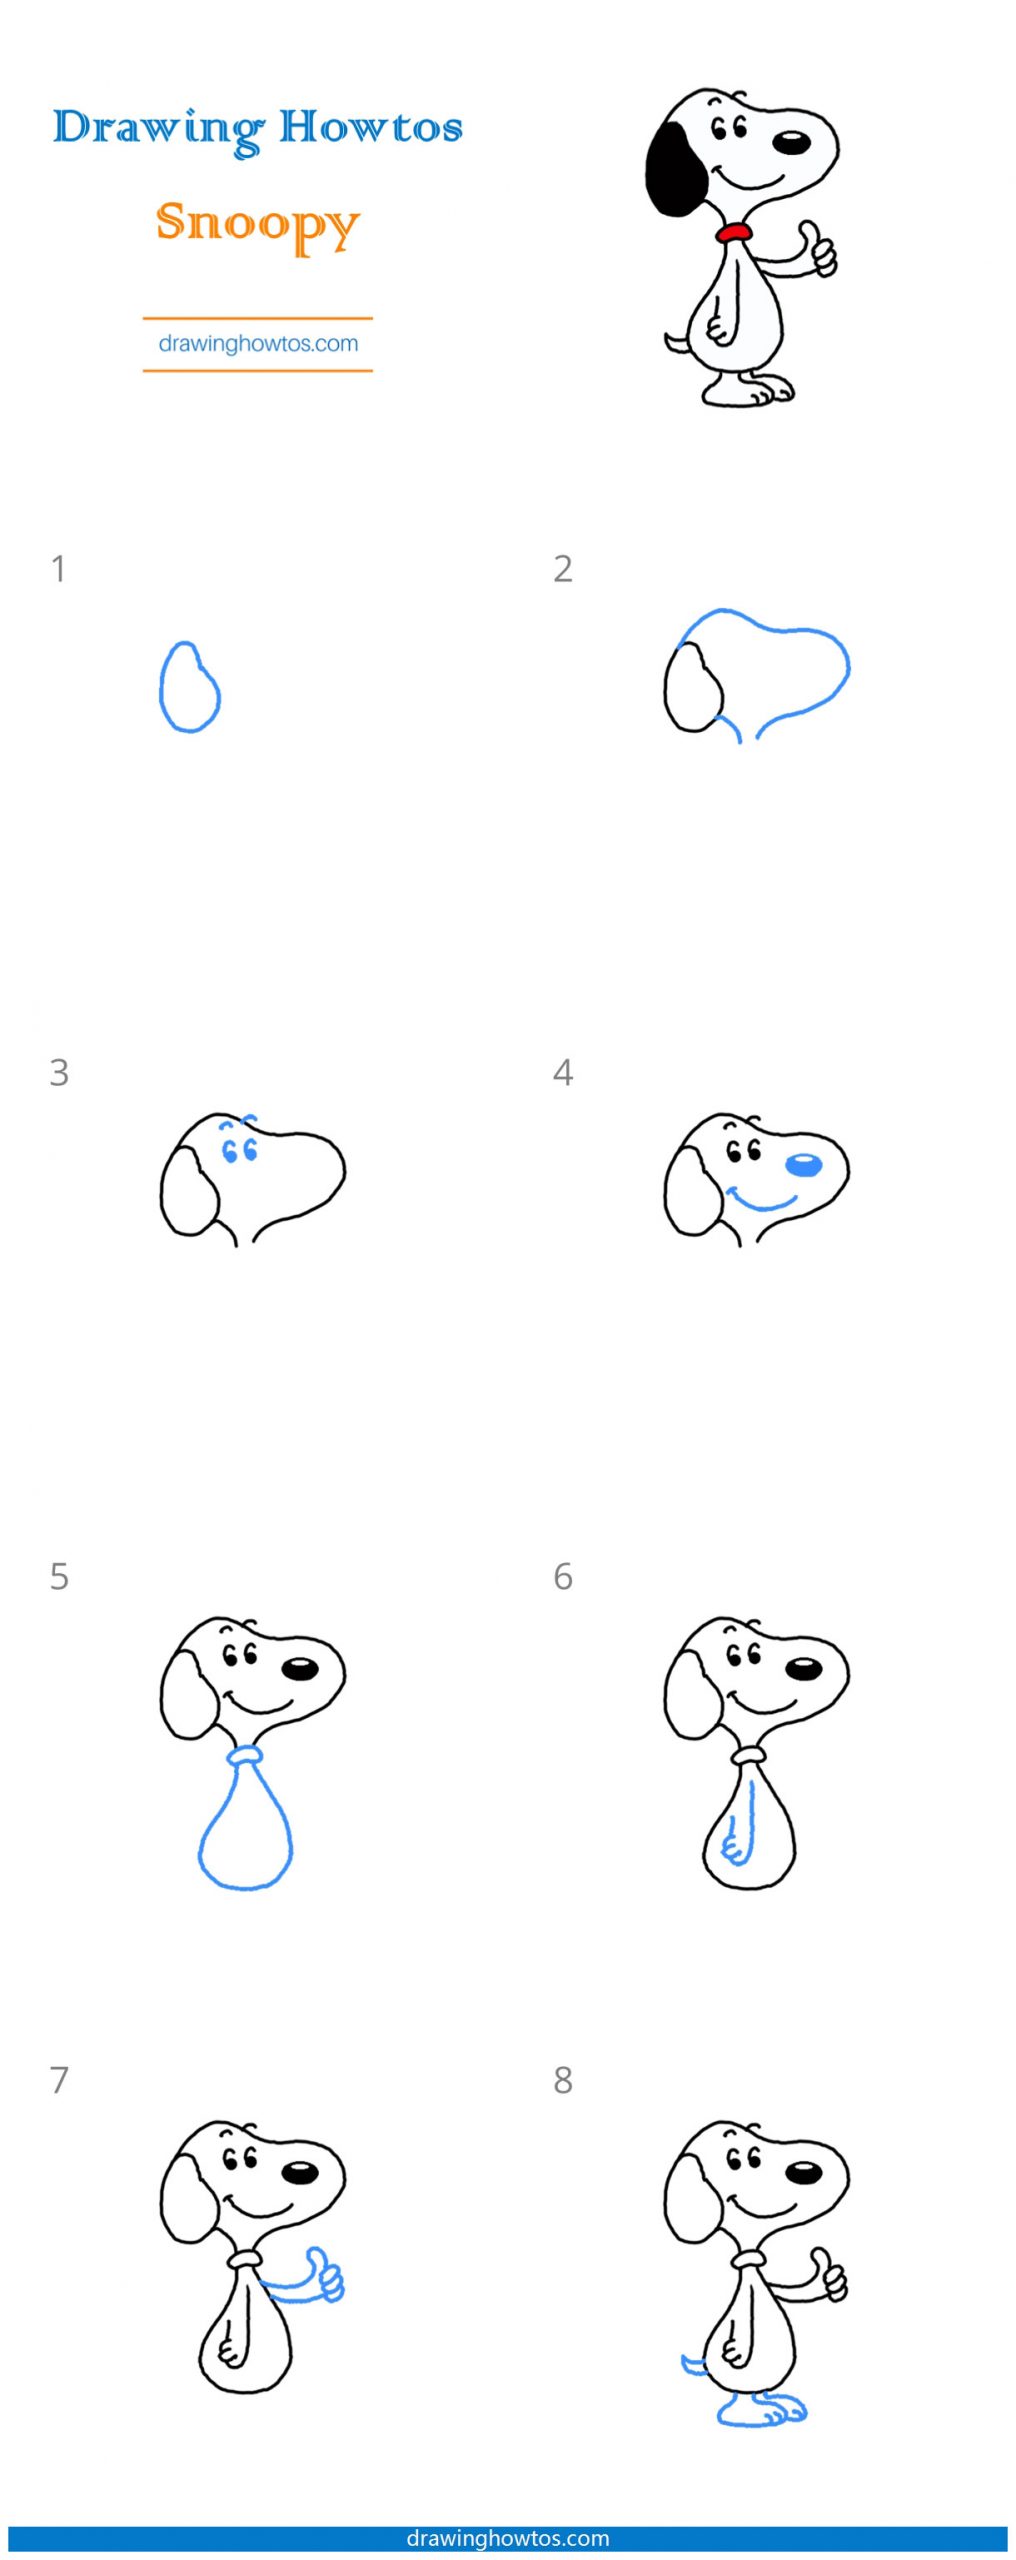 How to Draw Snoopy Step by Step